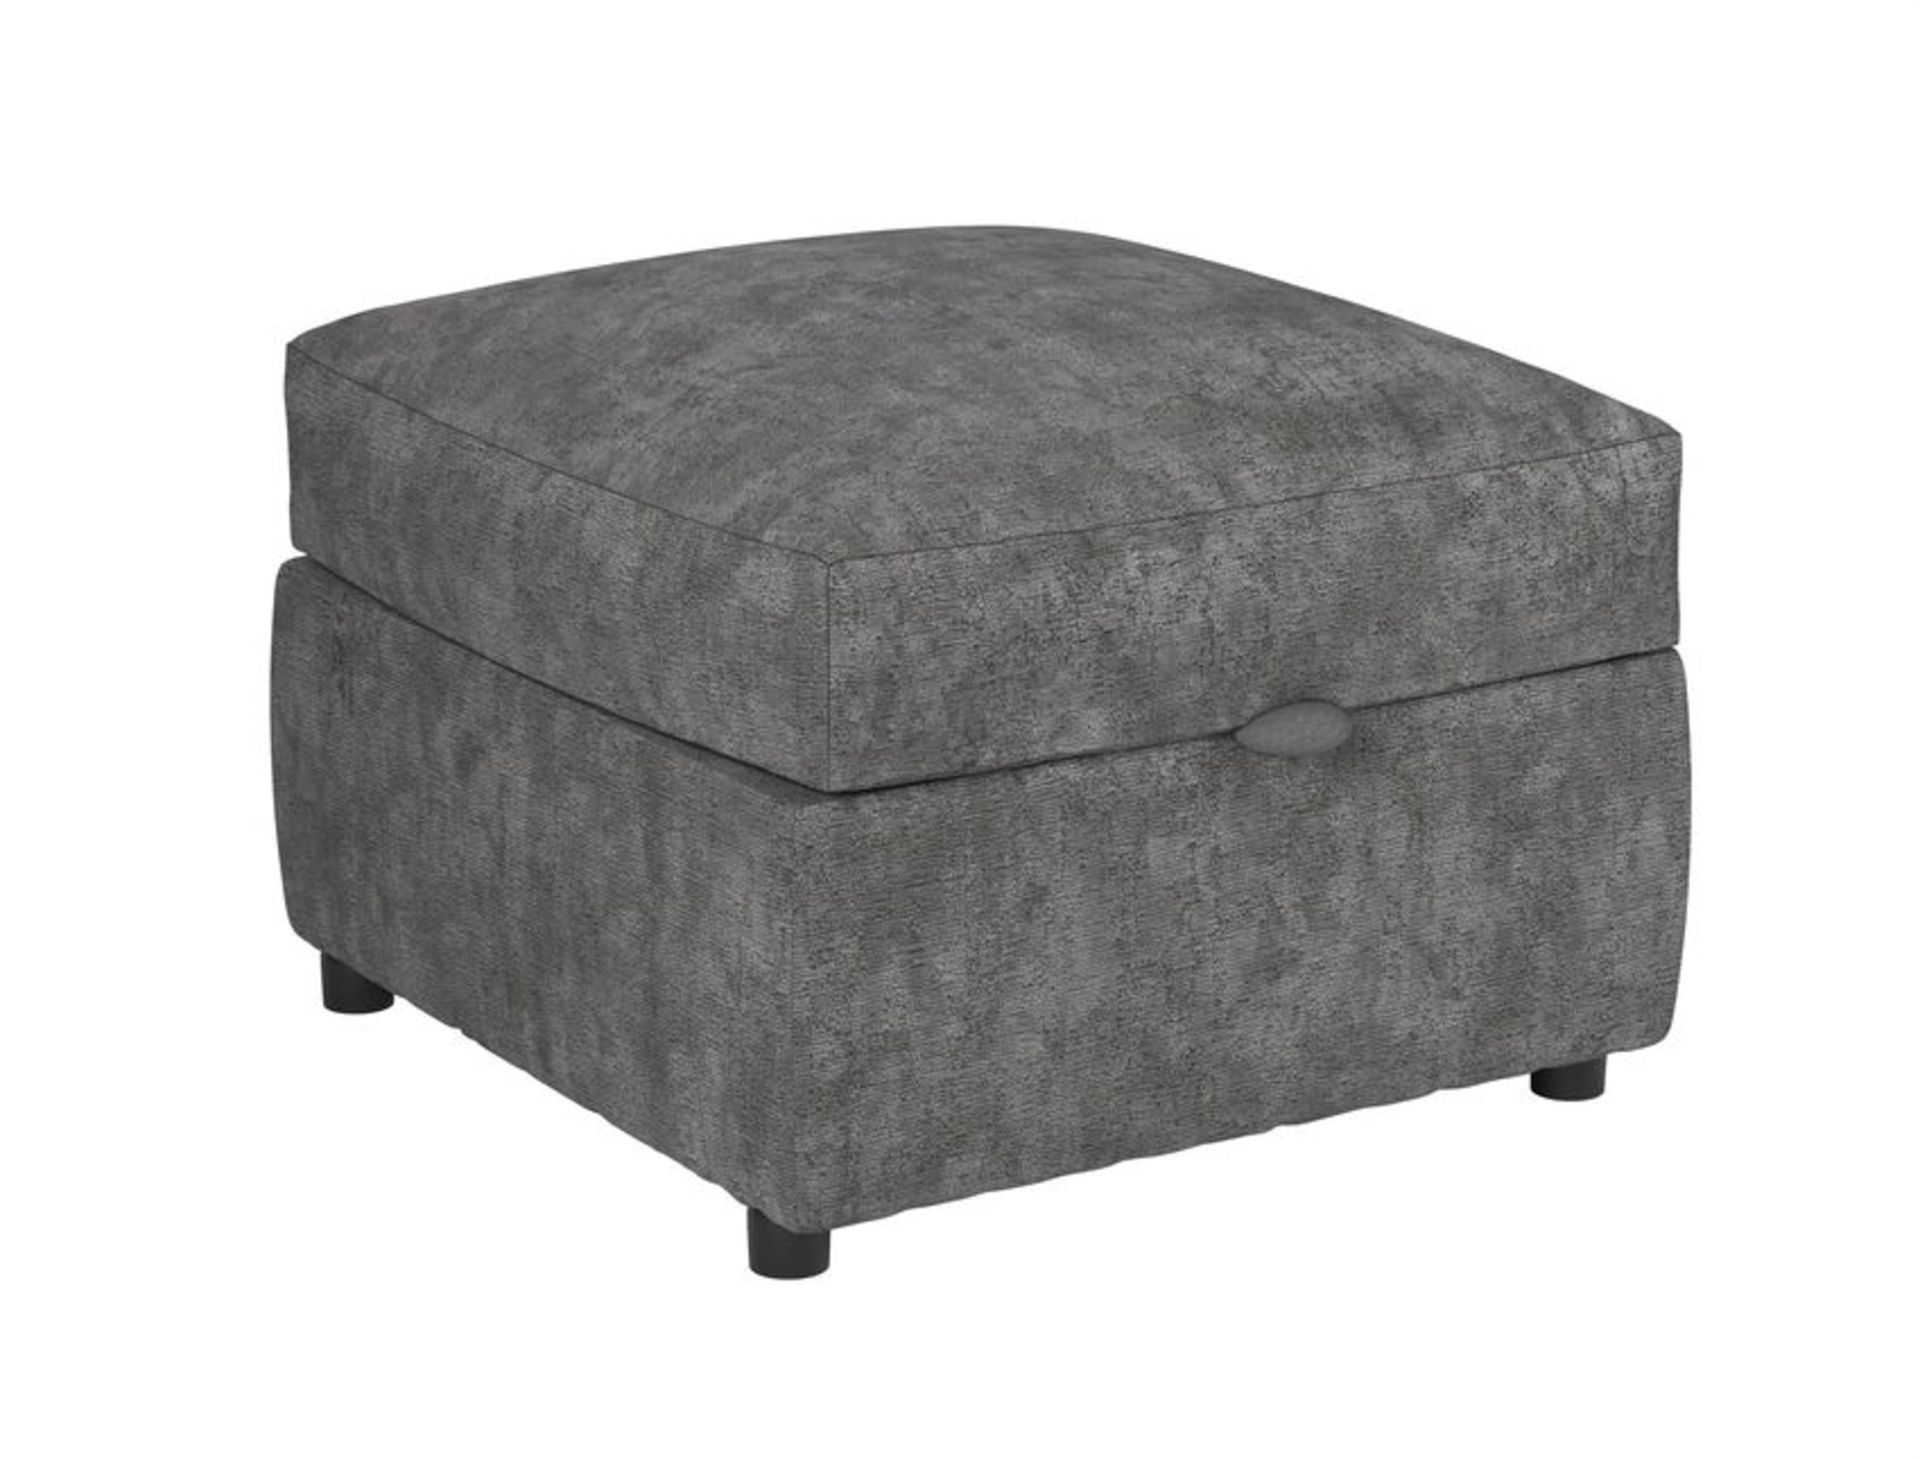 Flo Storage Footstool Flo Ash All Over Brushed Chrome RRP 339 About the Product(s) Flo Storage